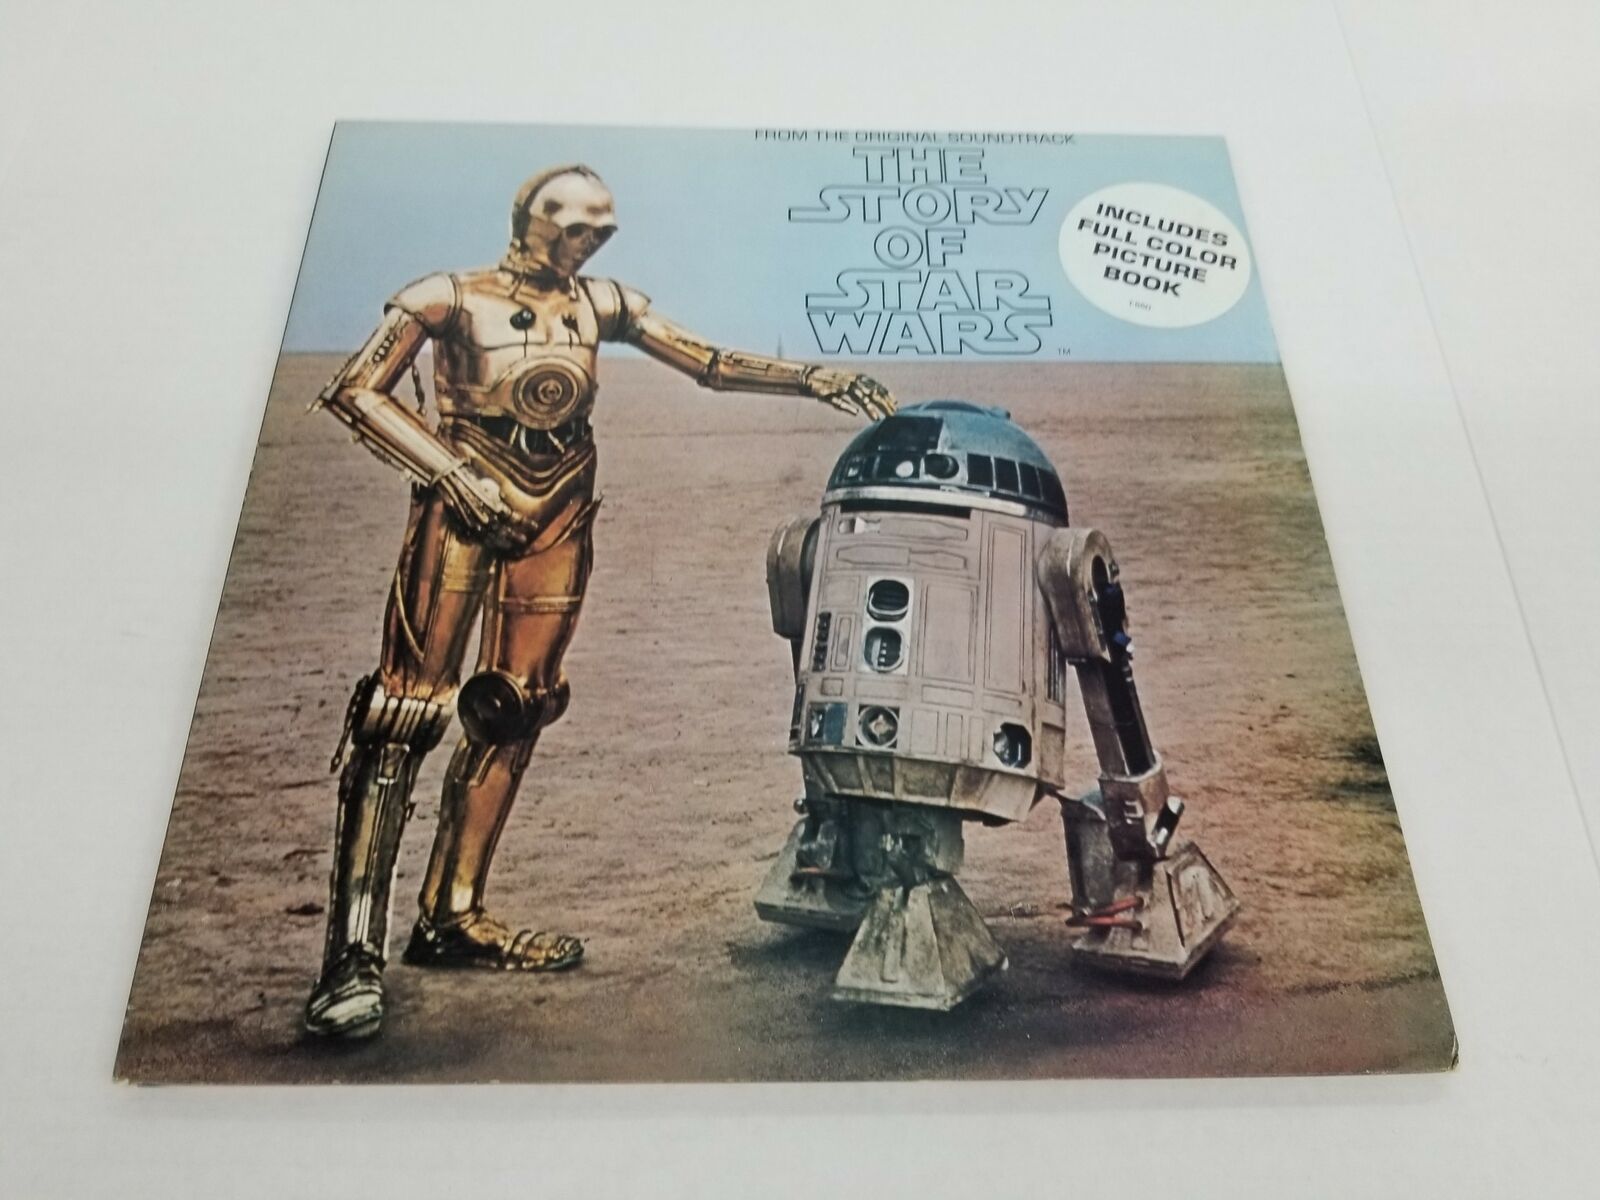 1977 The Story Of Star Wars LP Vinyl Album With Color Picture Book NM Shelf X